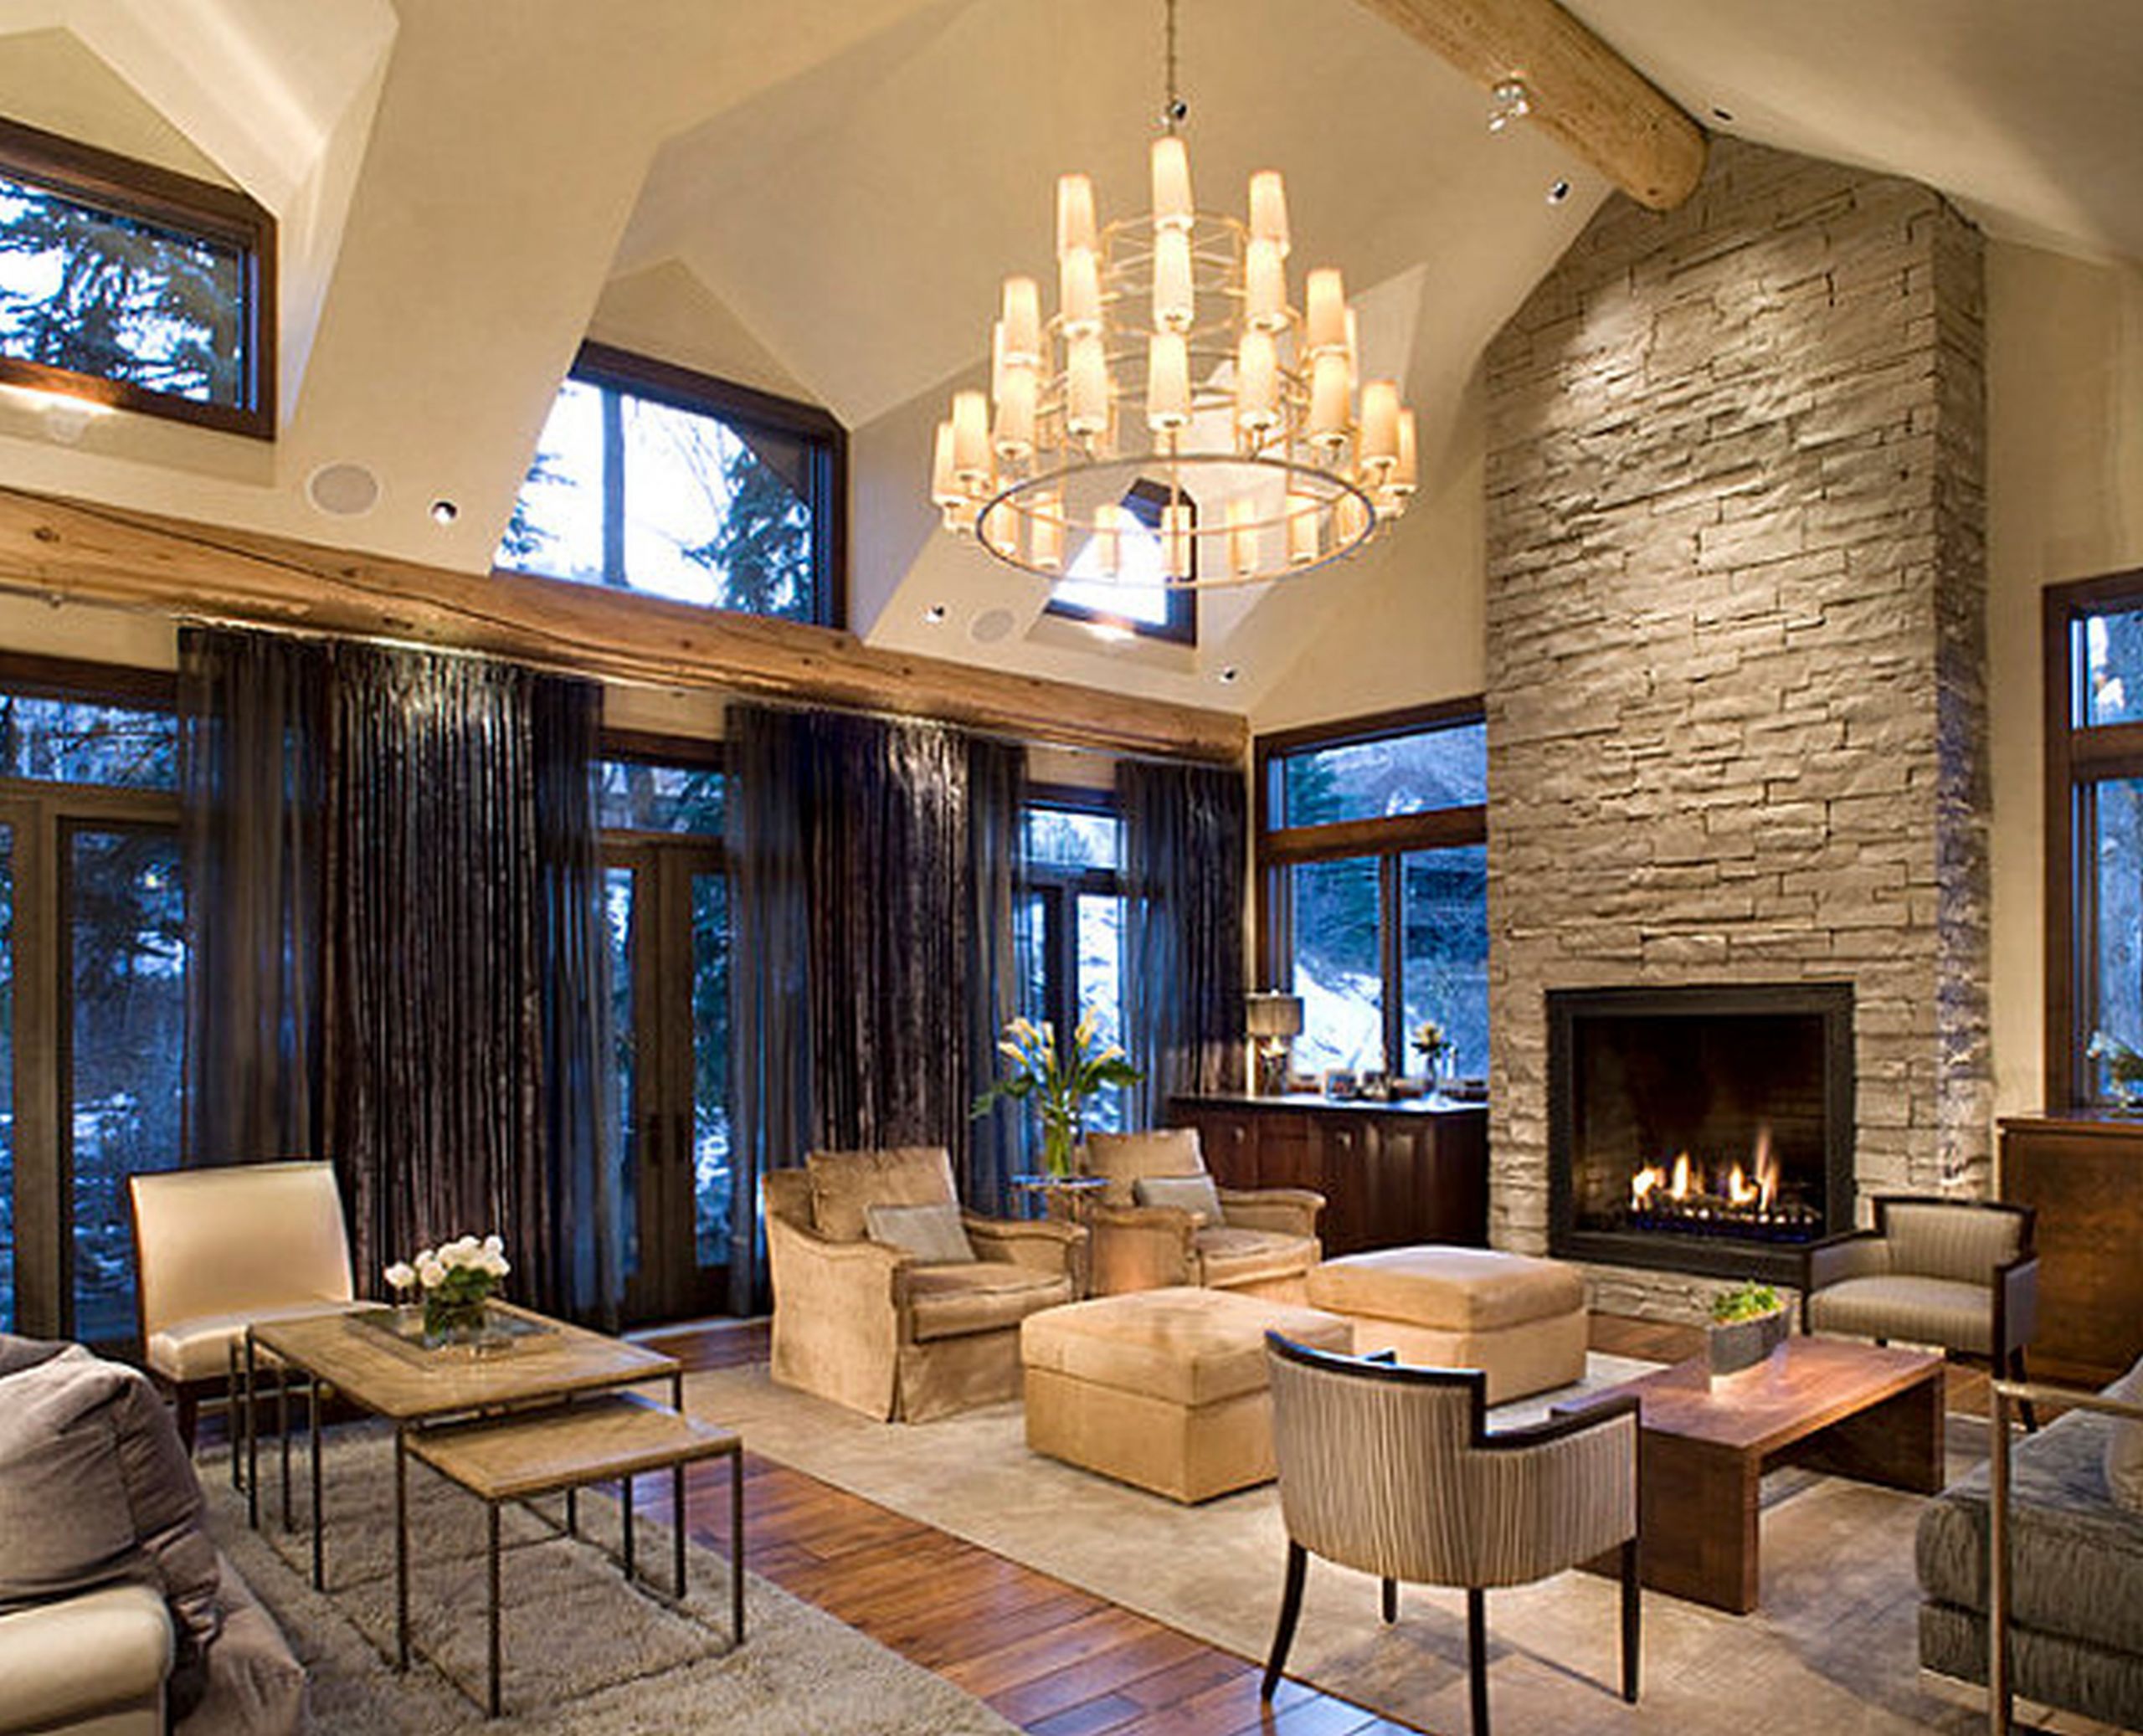 Modern Living Room With Fireplace
 